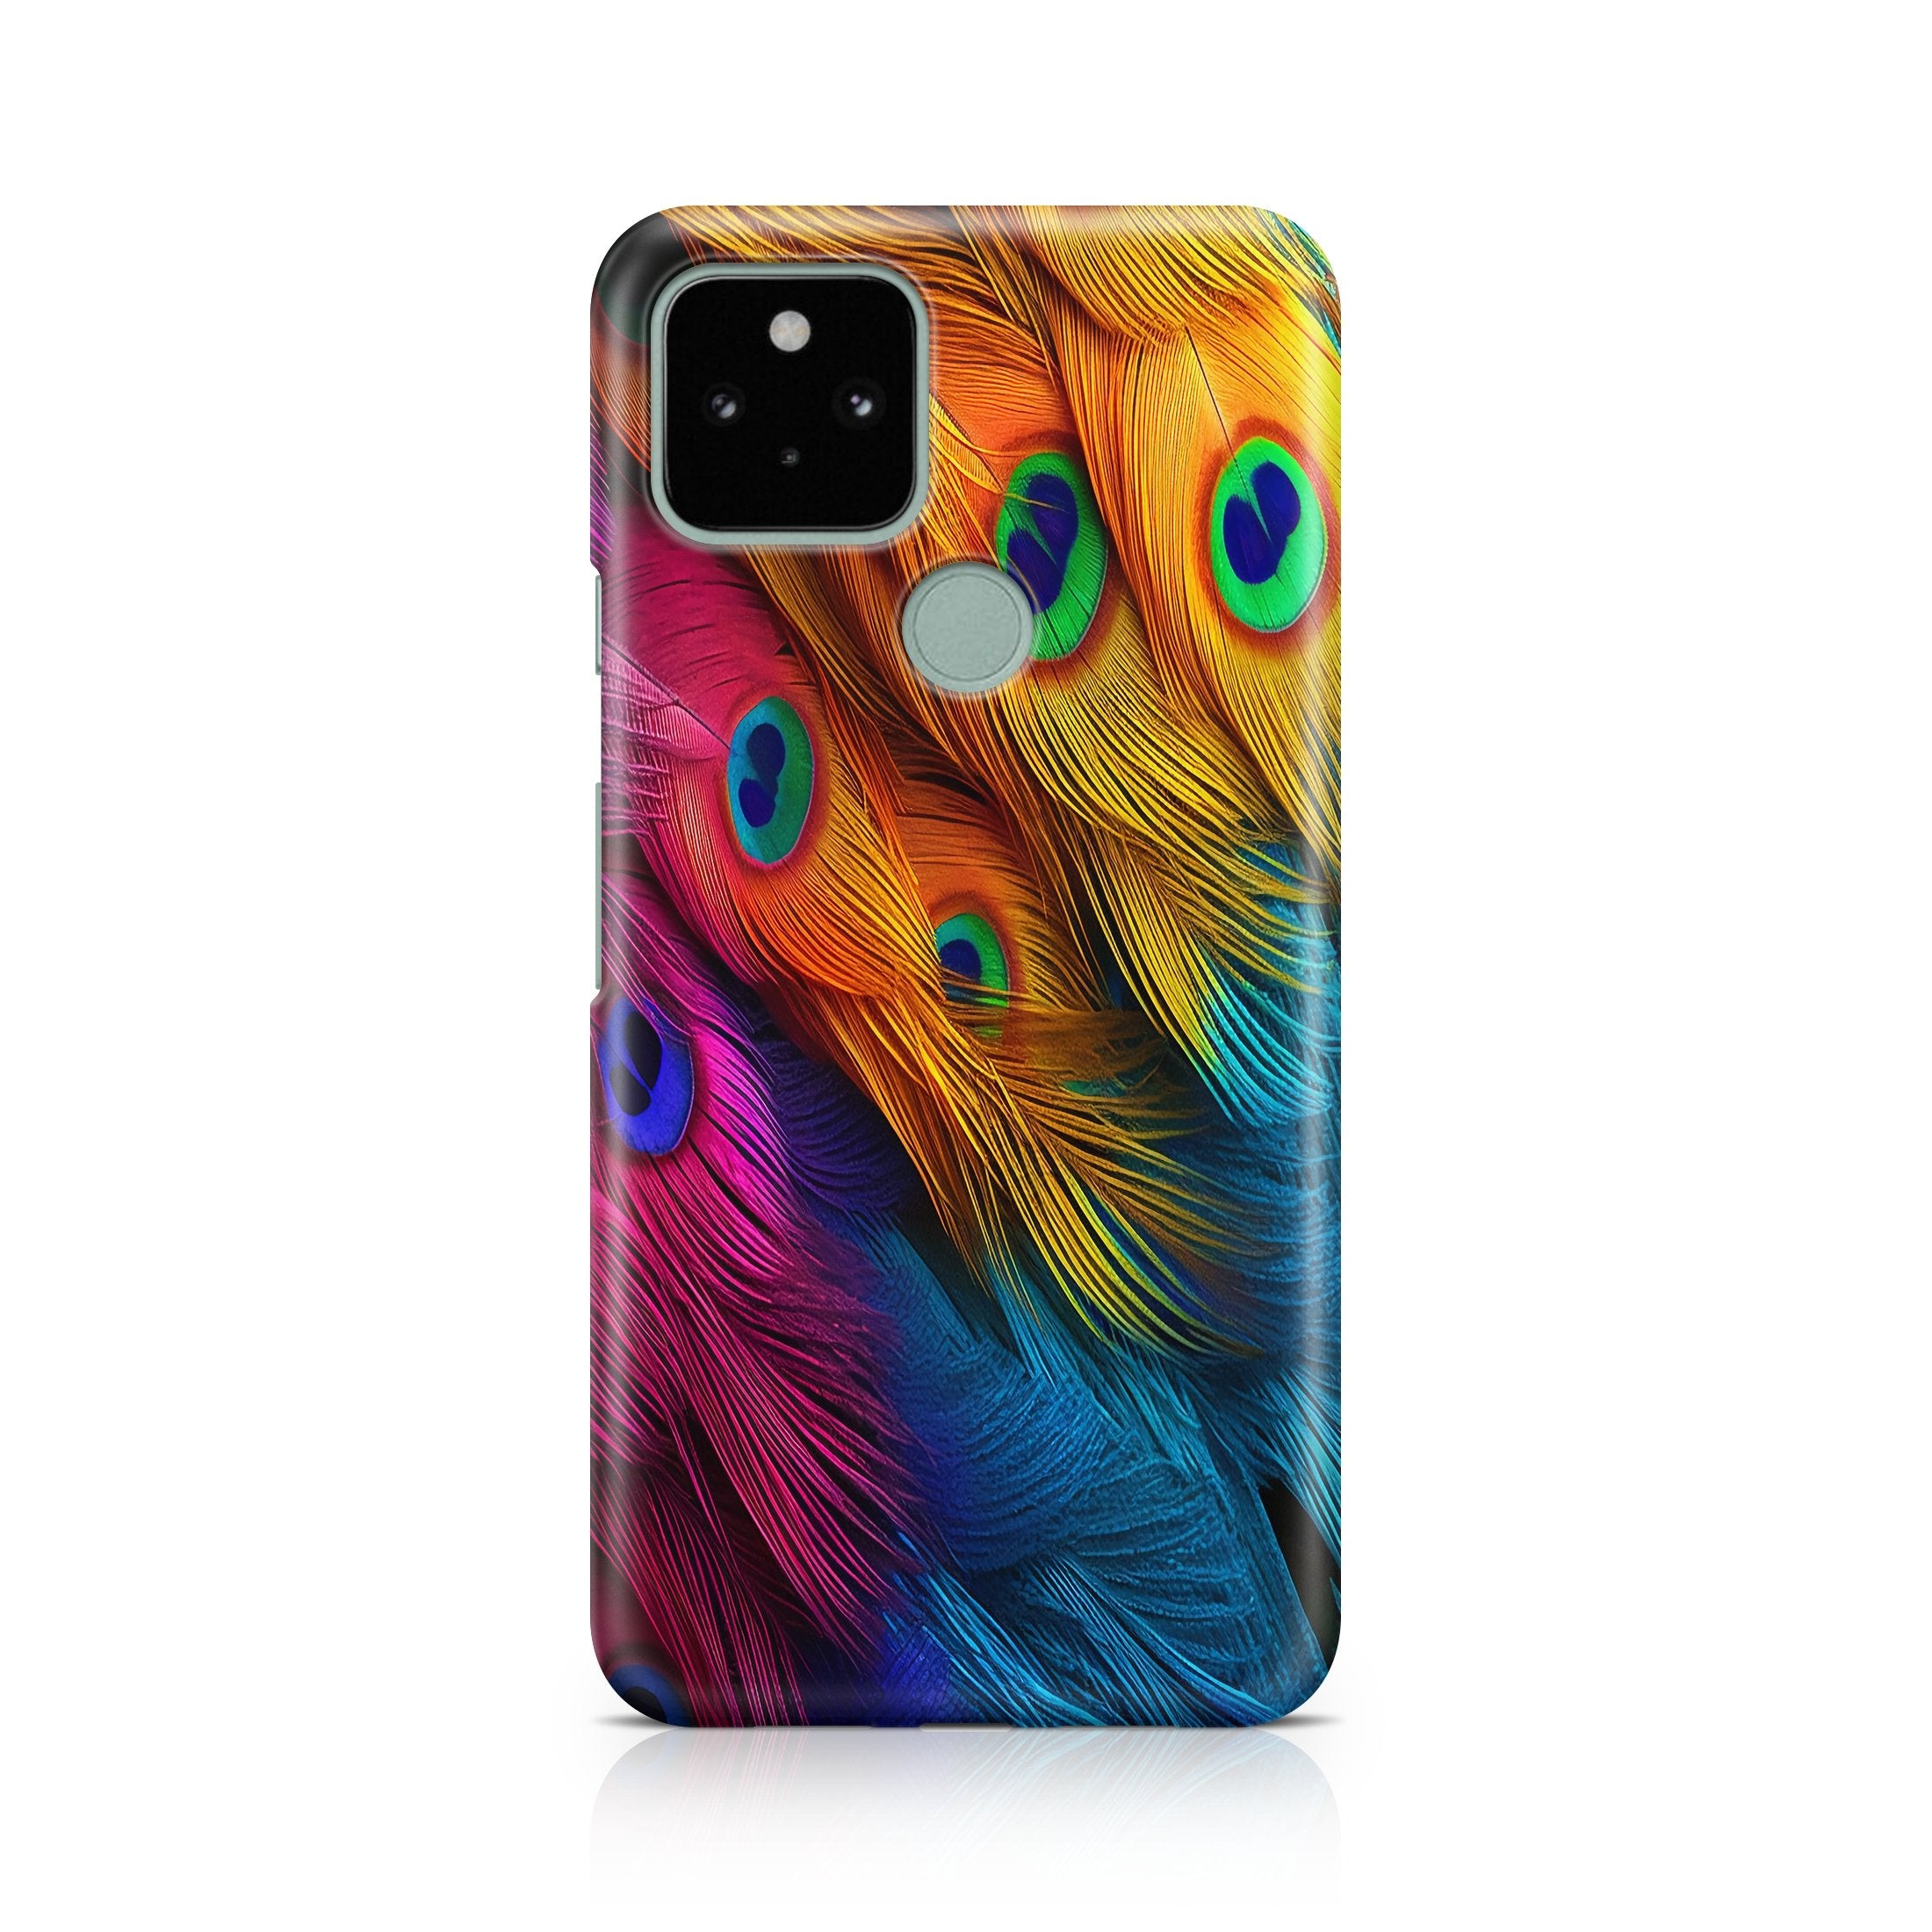 Complex Peacock - Google phone case designs by CaseSwagger